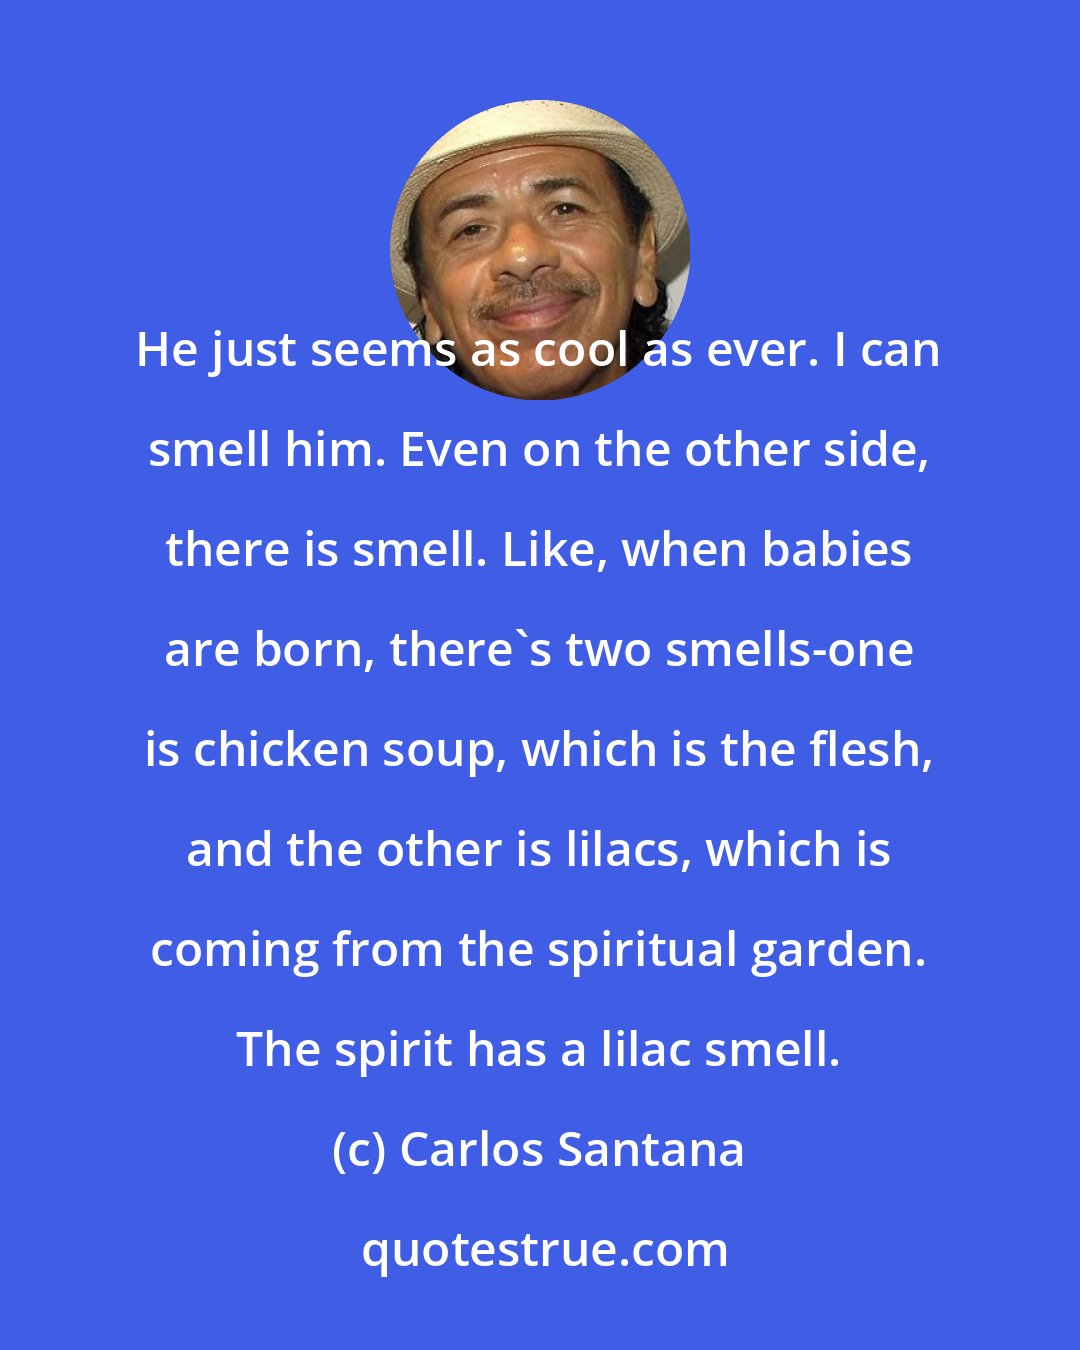 Carlos Santana: He just seems as cool as ever. I can smell him. Even on the other side, there is smell. Like, when babies are born, there's two smells-one is chicken soup, which is the flesh, and the other is lilacs, which is coming from the spiritual garden. The spirit has a lilac smell.